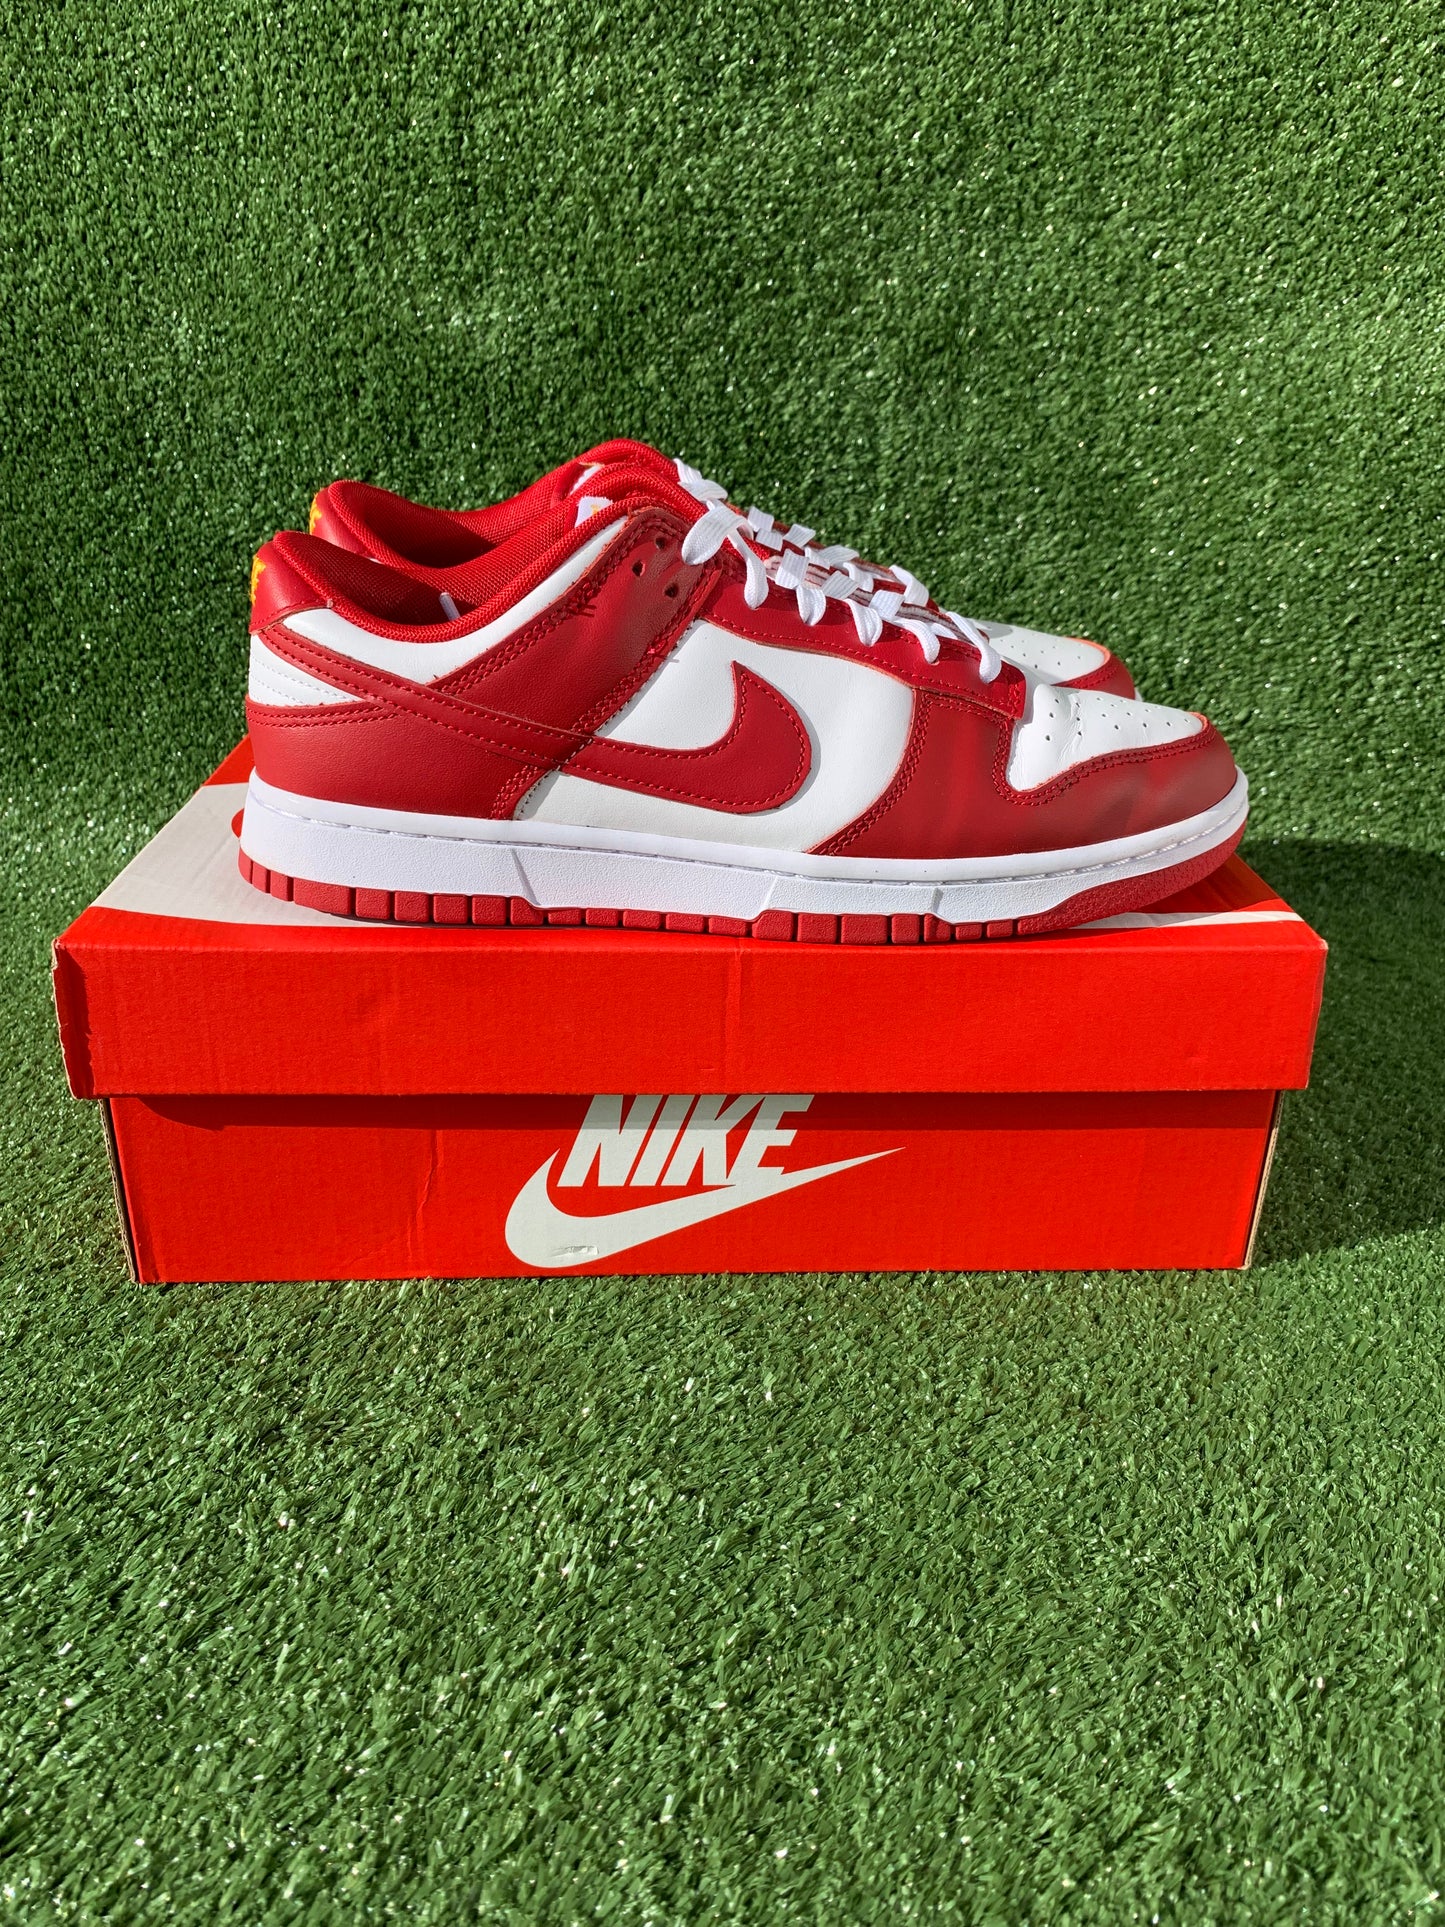 Nike Dunk Low Gym Red [US9 - USED]